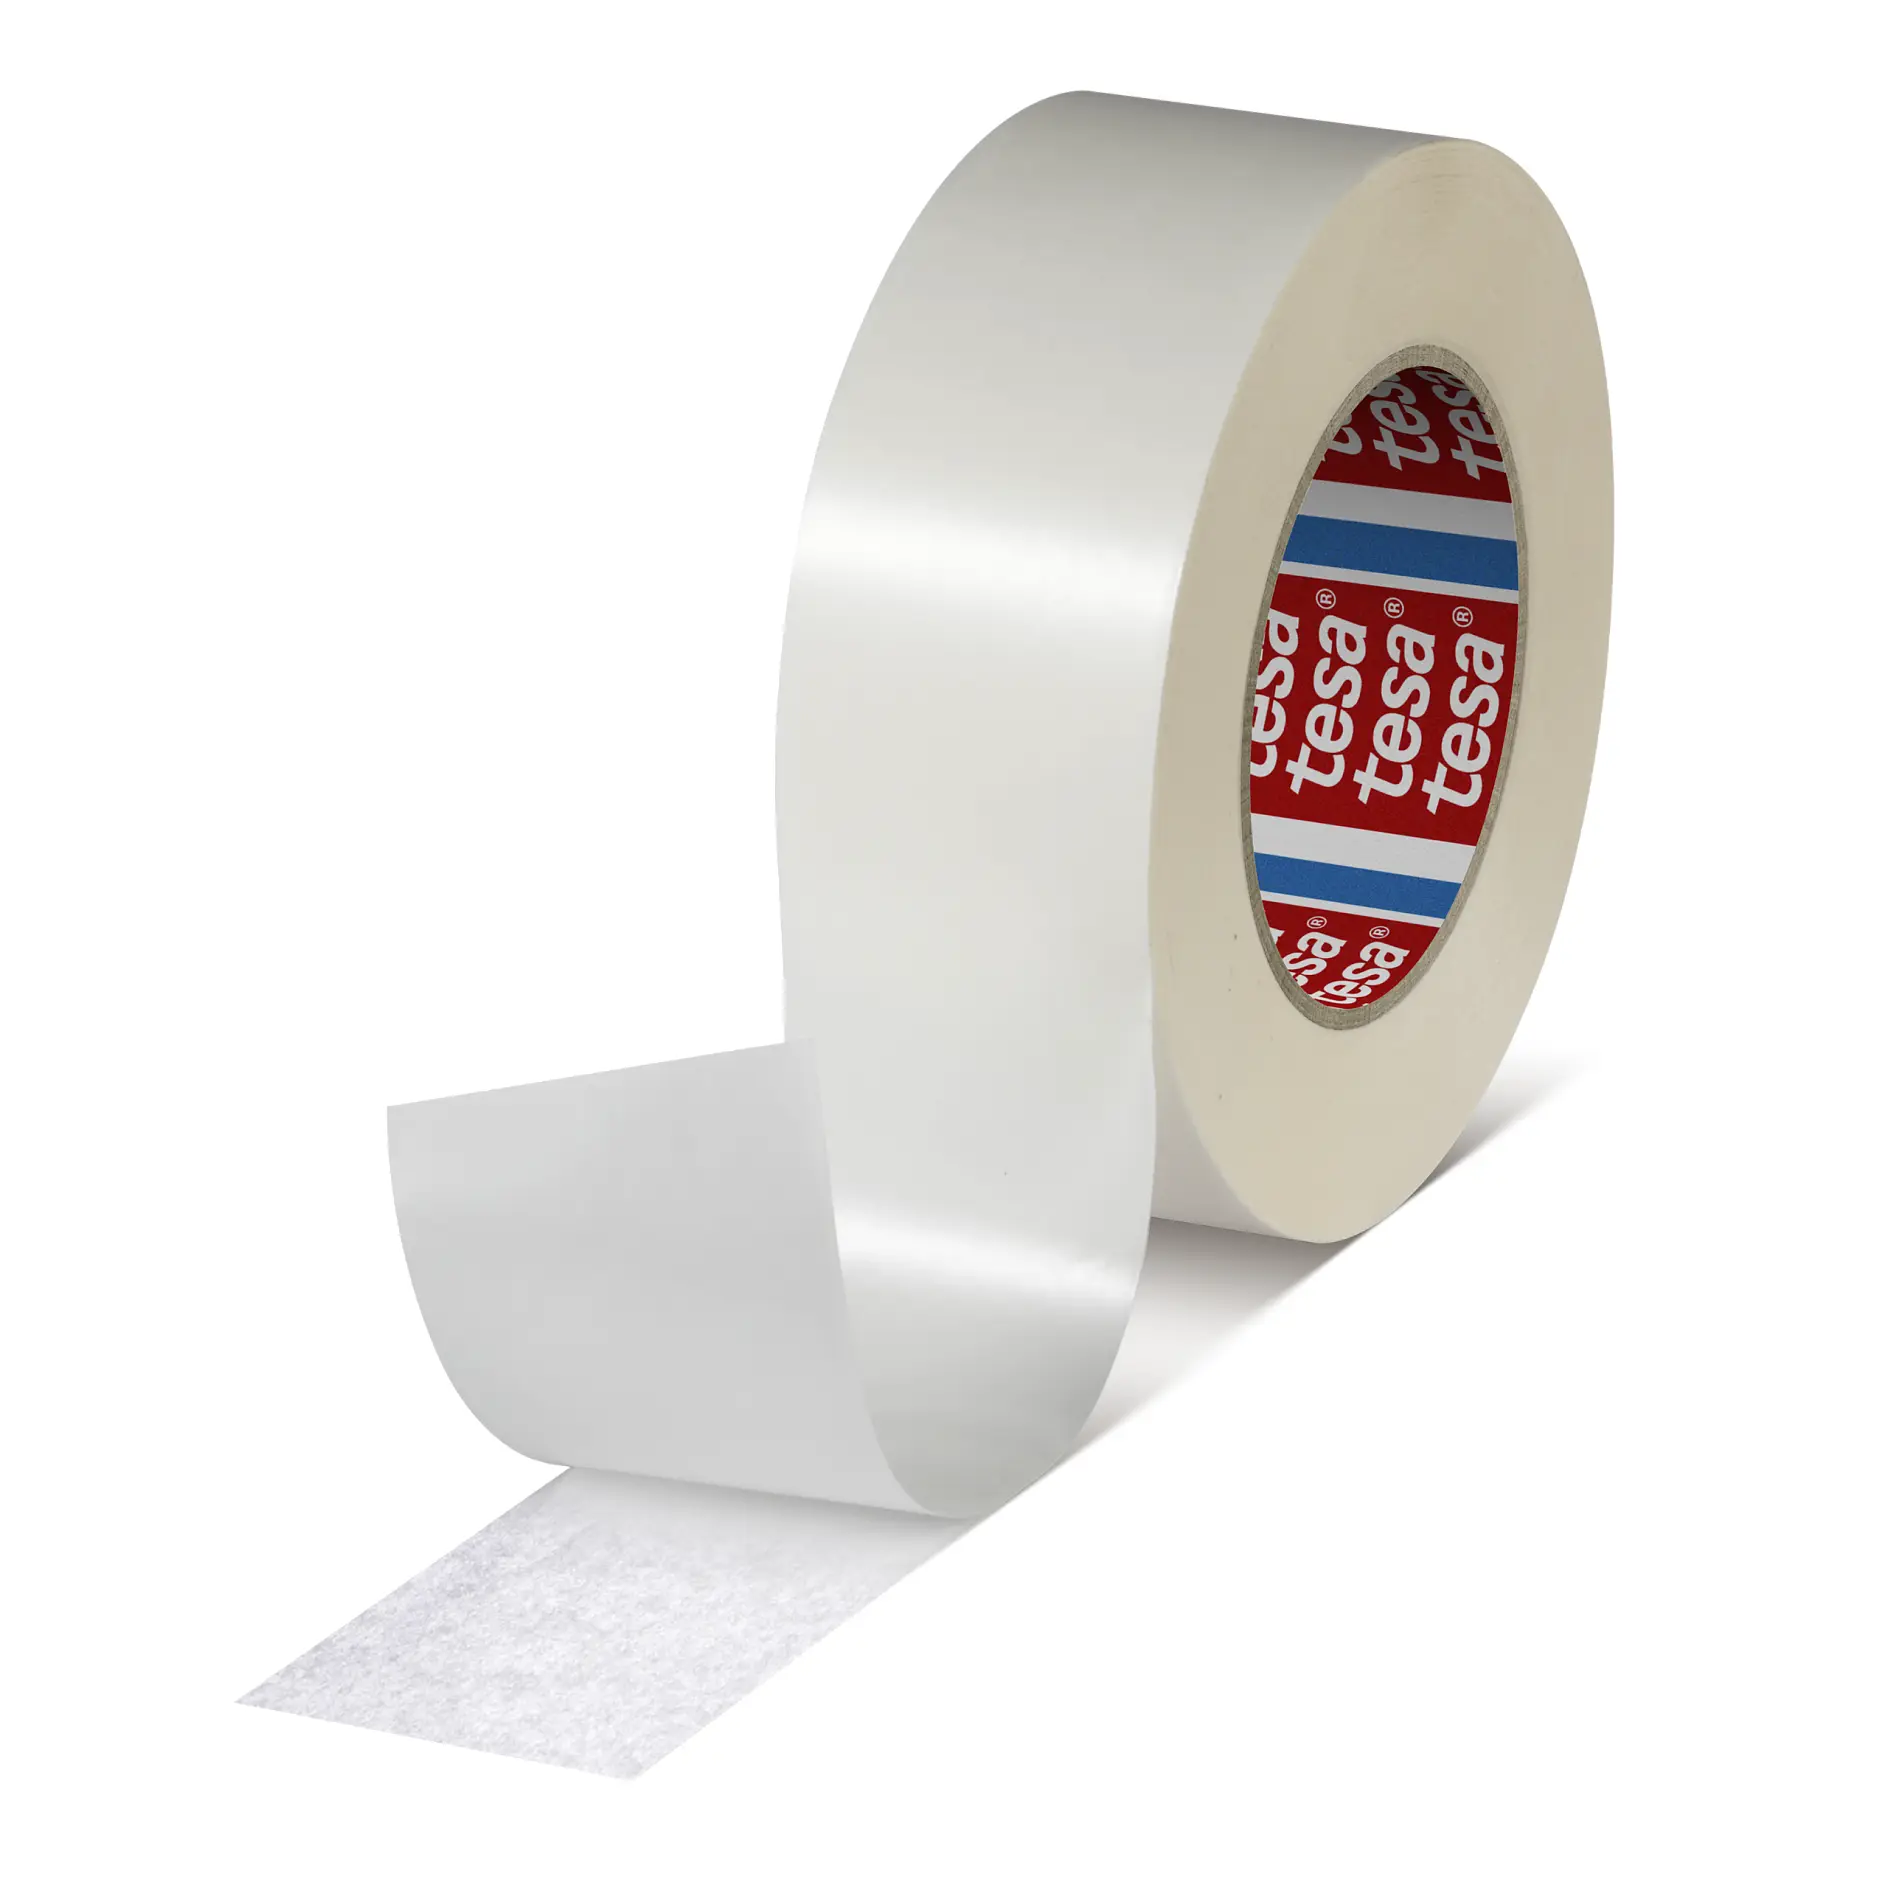 tesa-50607-pv41-double-sided-splicing-tape-white-translucent-506070002141-pr